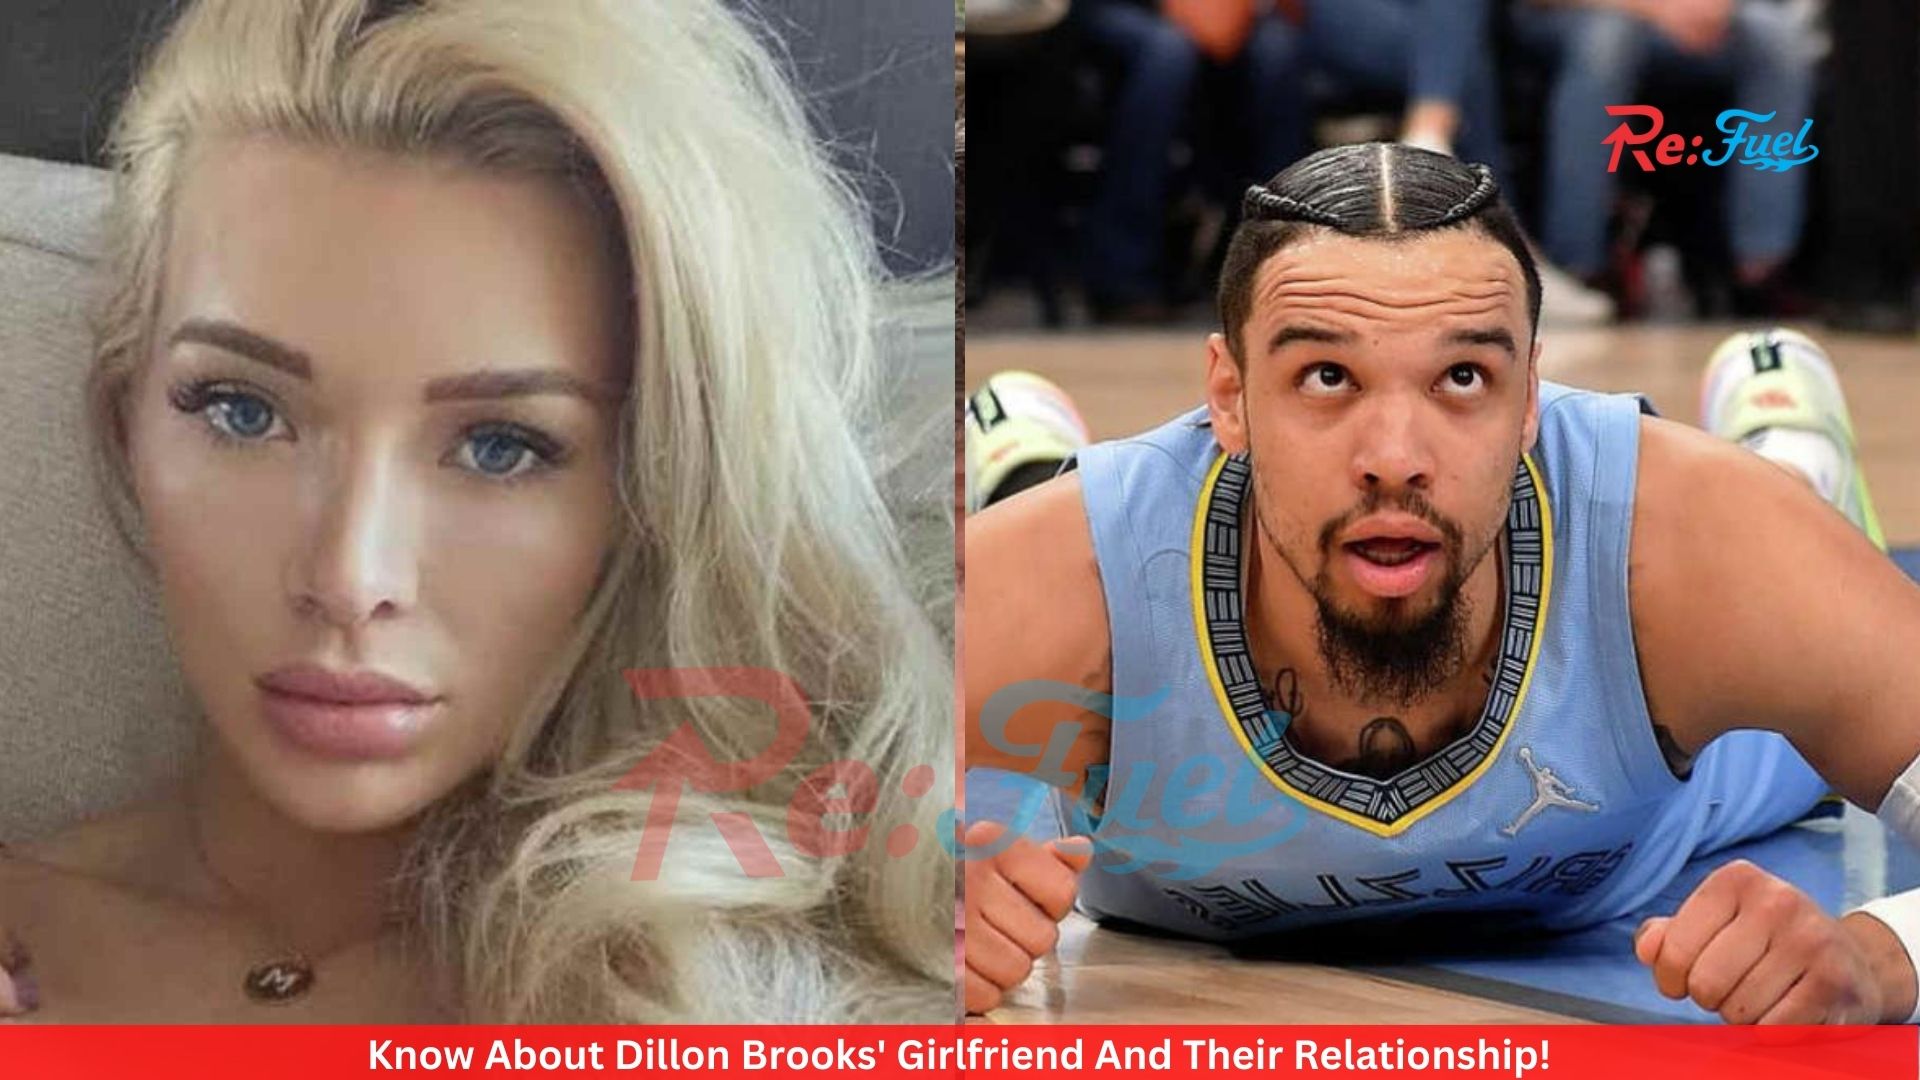 Know About Dillon Brooks' Girlfriend And Their Relationship!